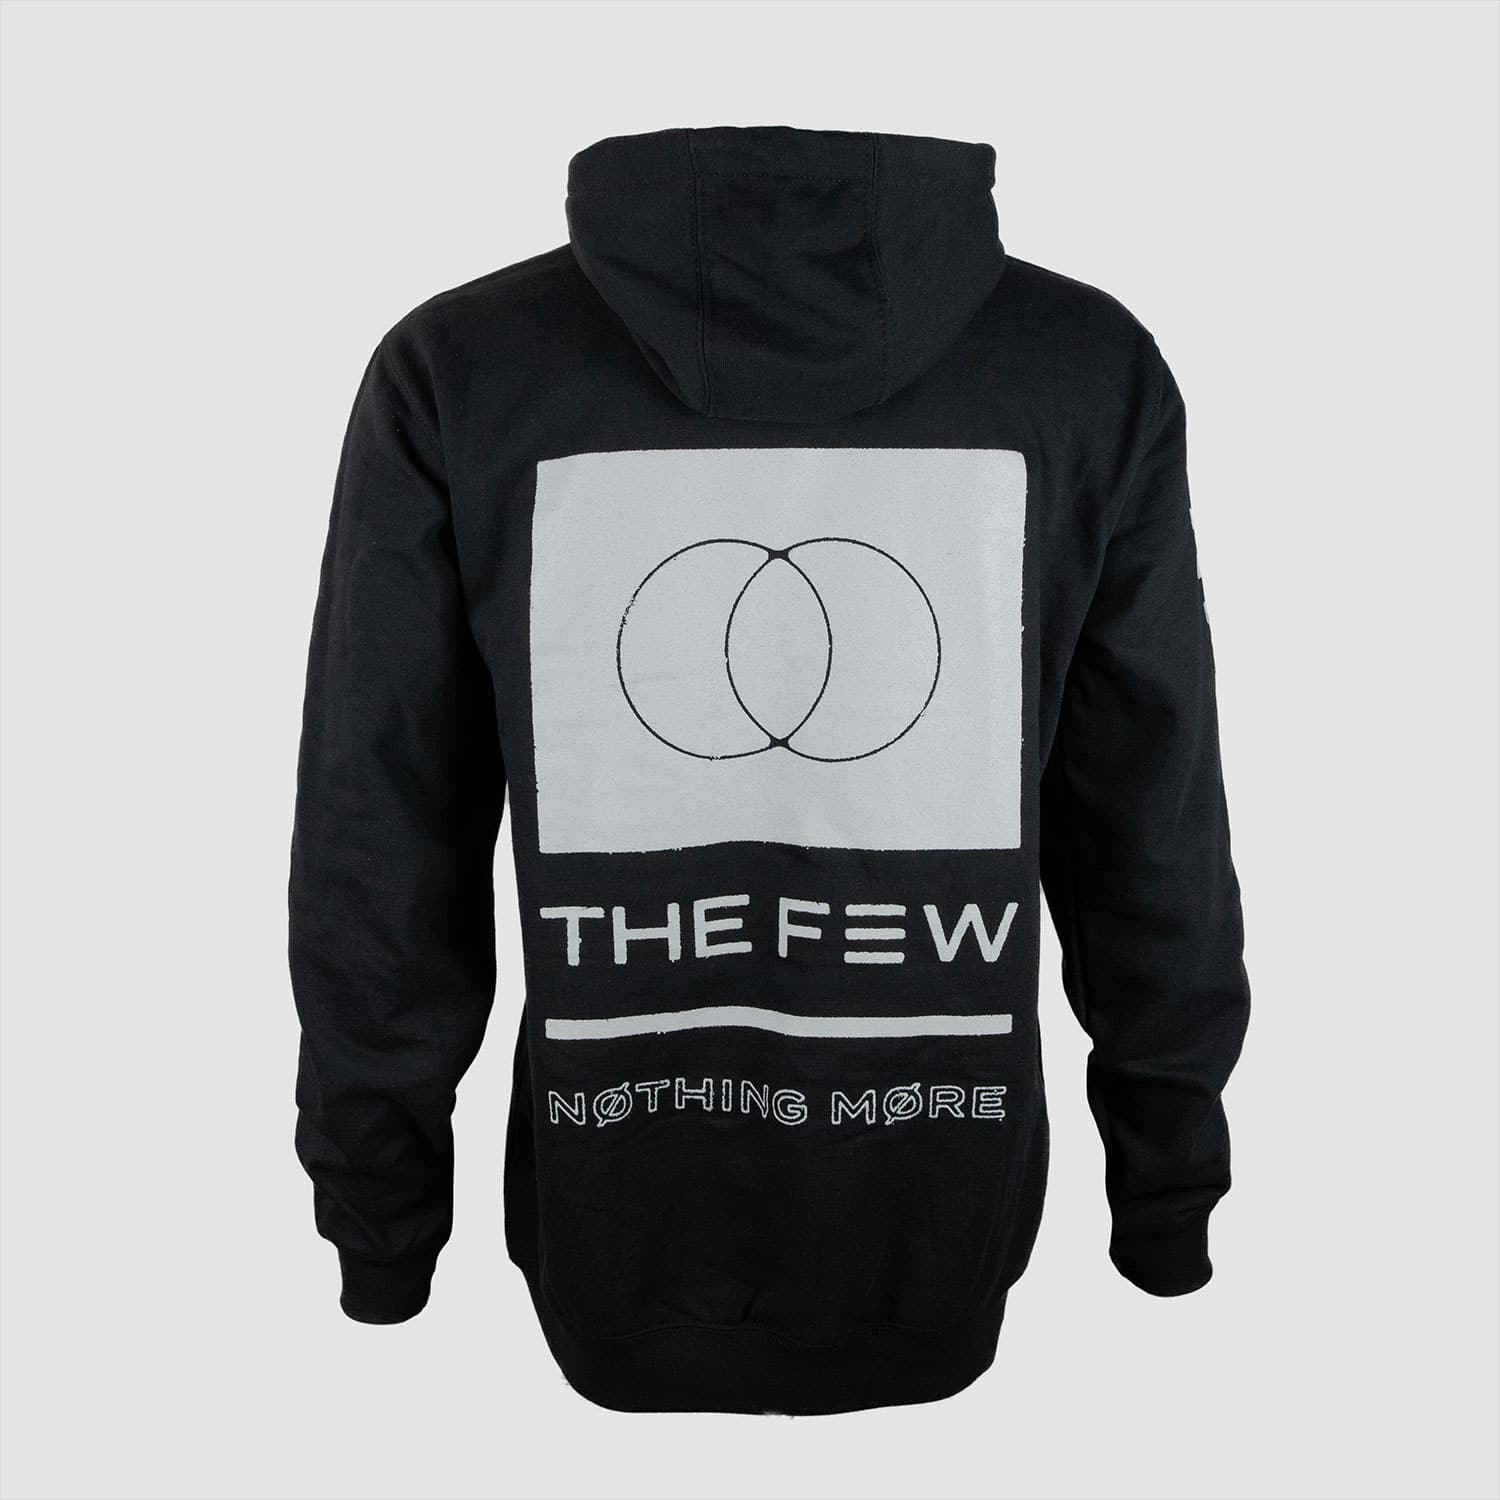 NOTHING MORE - THE FEW CHAMPION LOGO HOODIE - | THE FEW